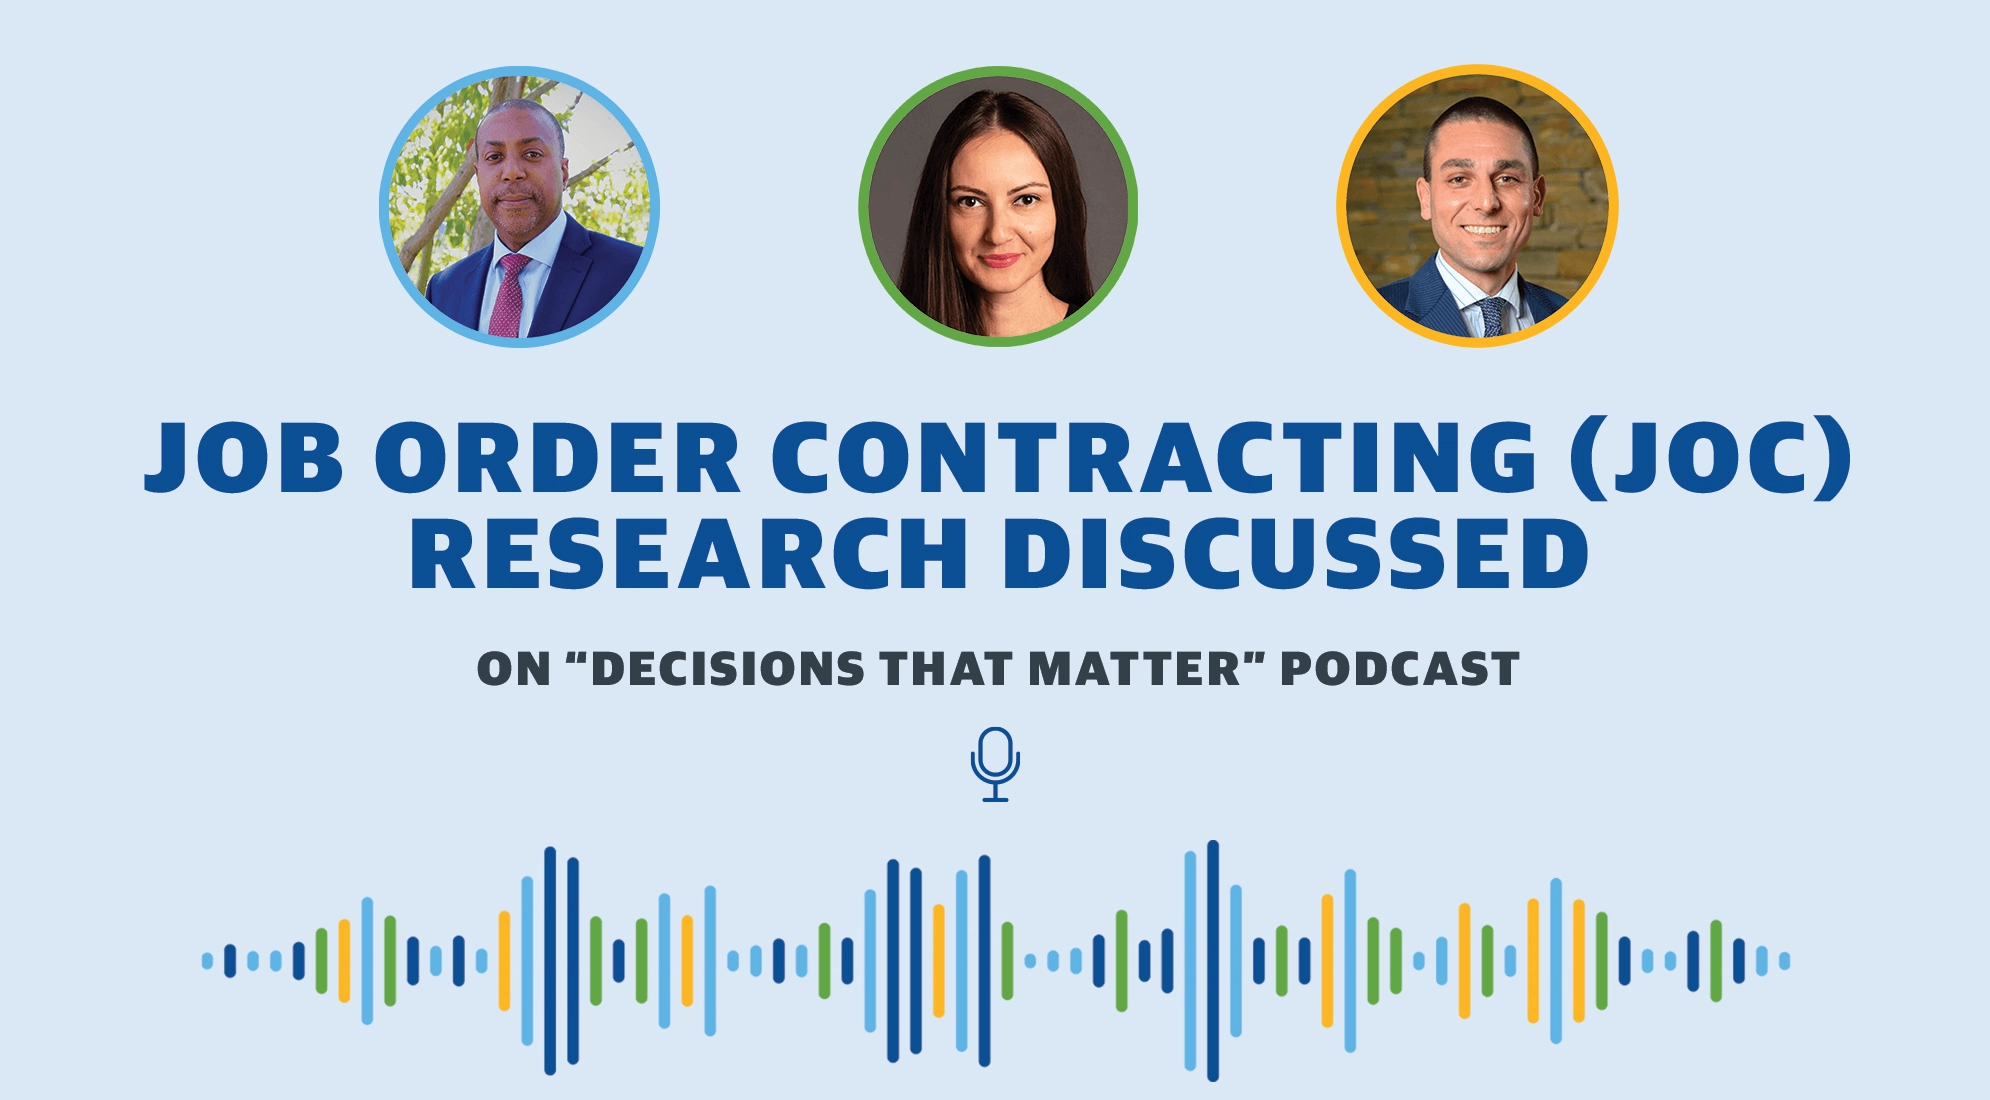 Job Order Contracting research was discussed on the decisions that matter podcast.